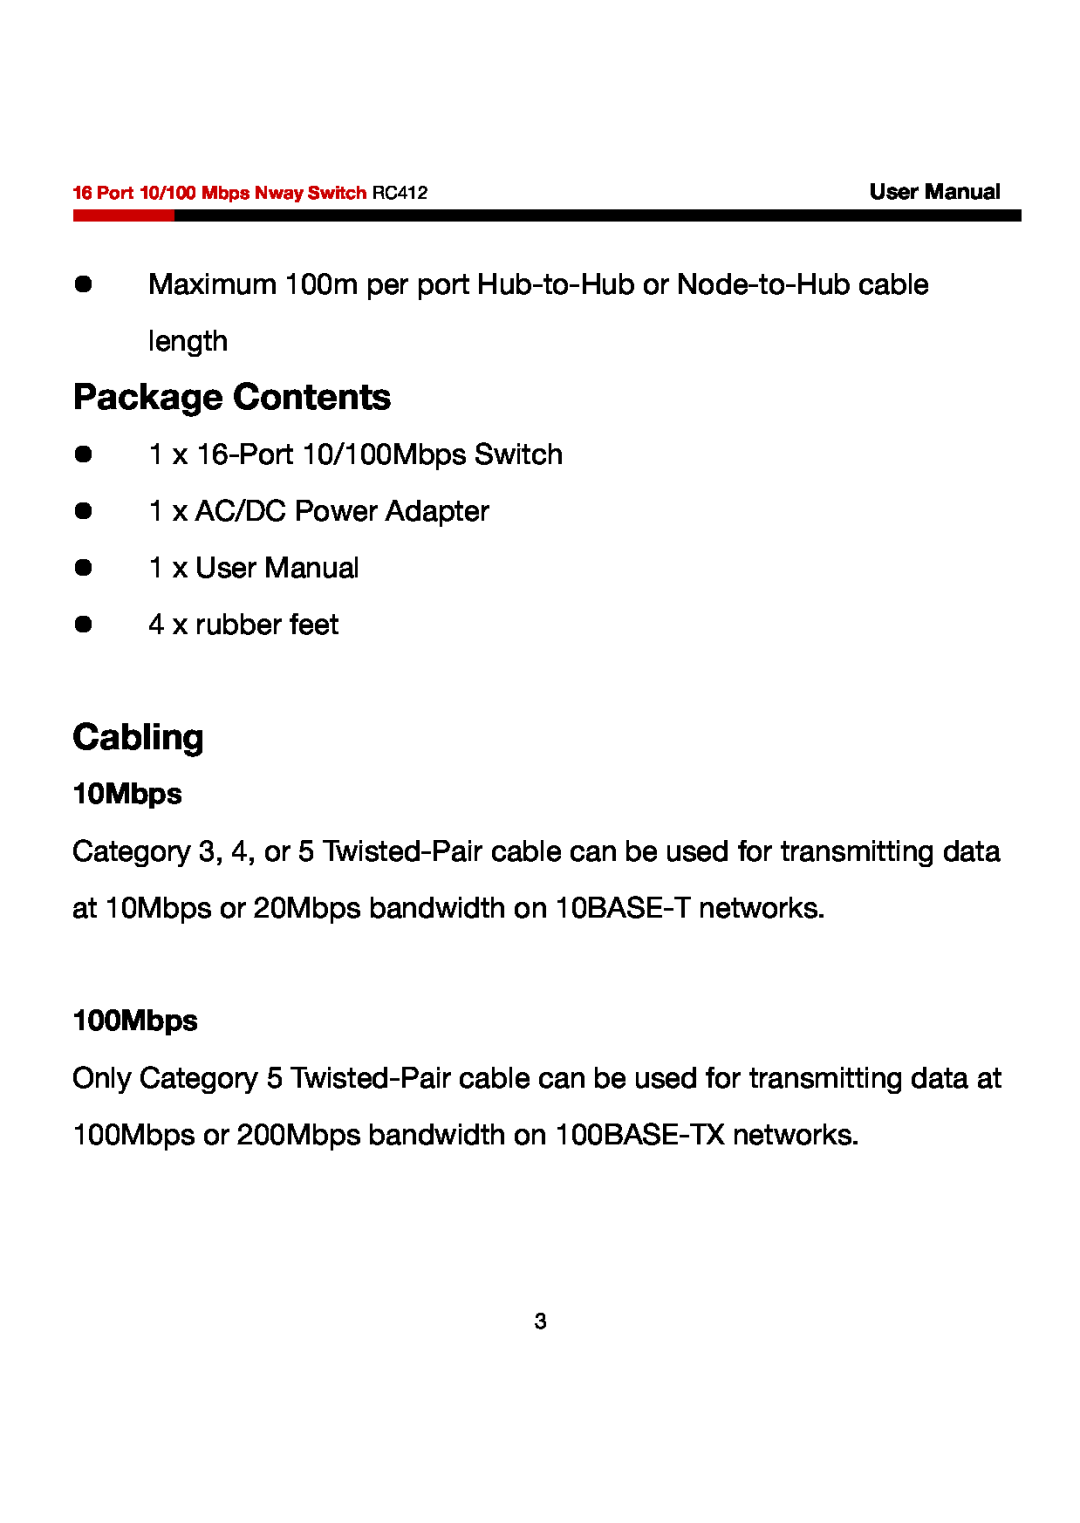 Rosewill RC412 user manual Package Contents, Cabling, 10Mbps, 100Mbps 